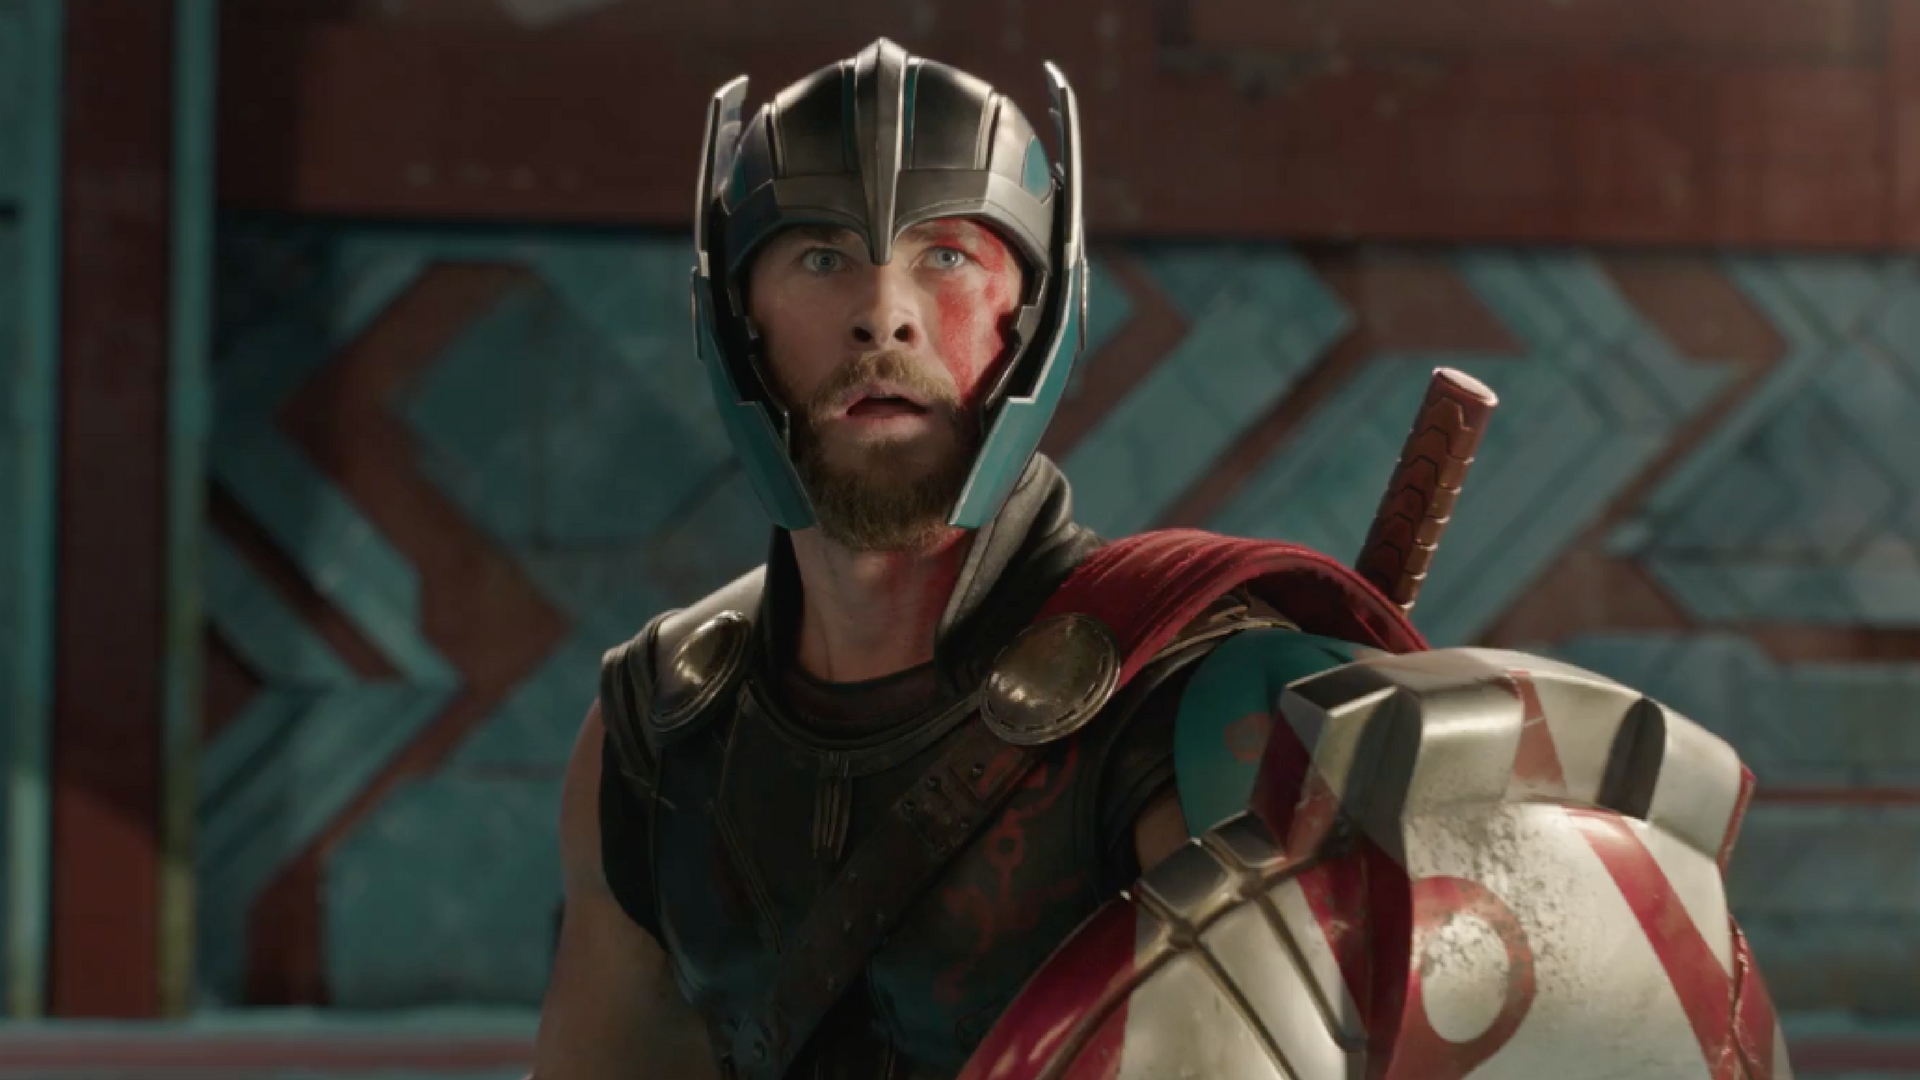 Thor: Ragnarok trailer is Marvel's most watched